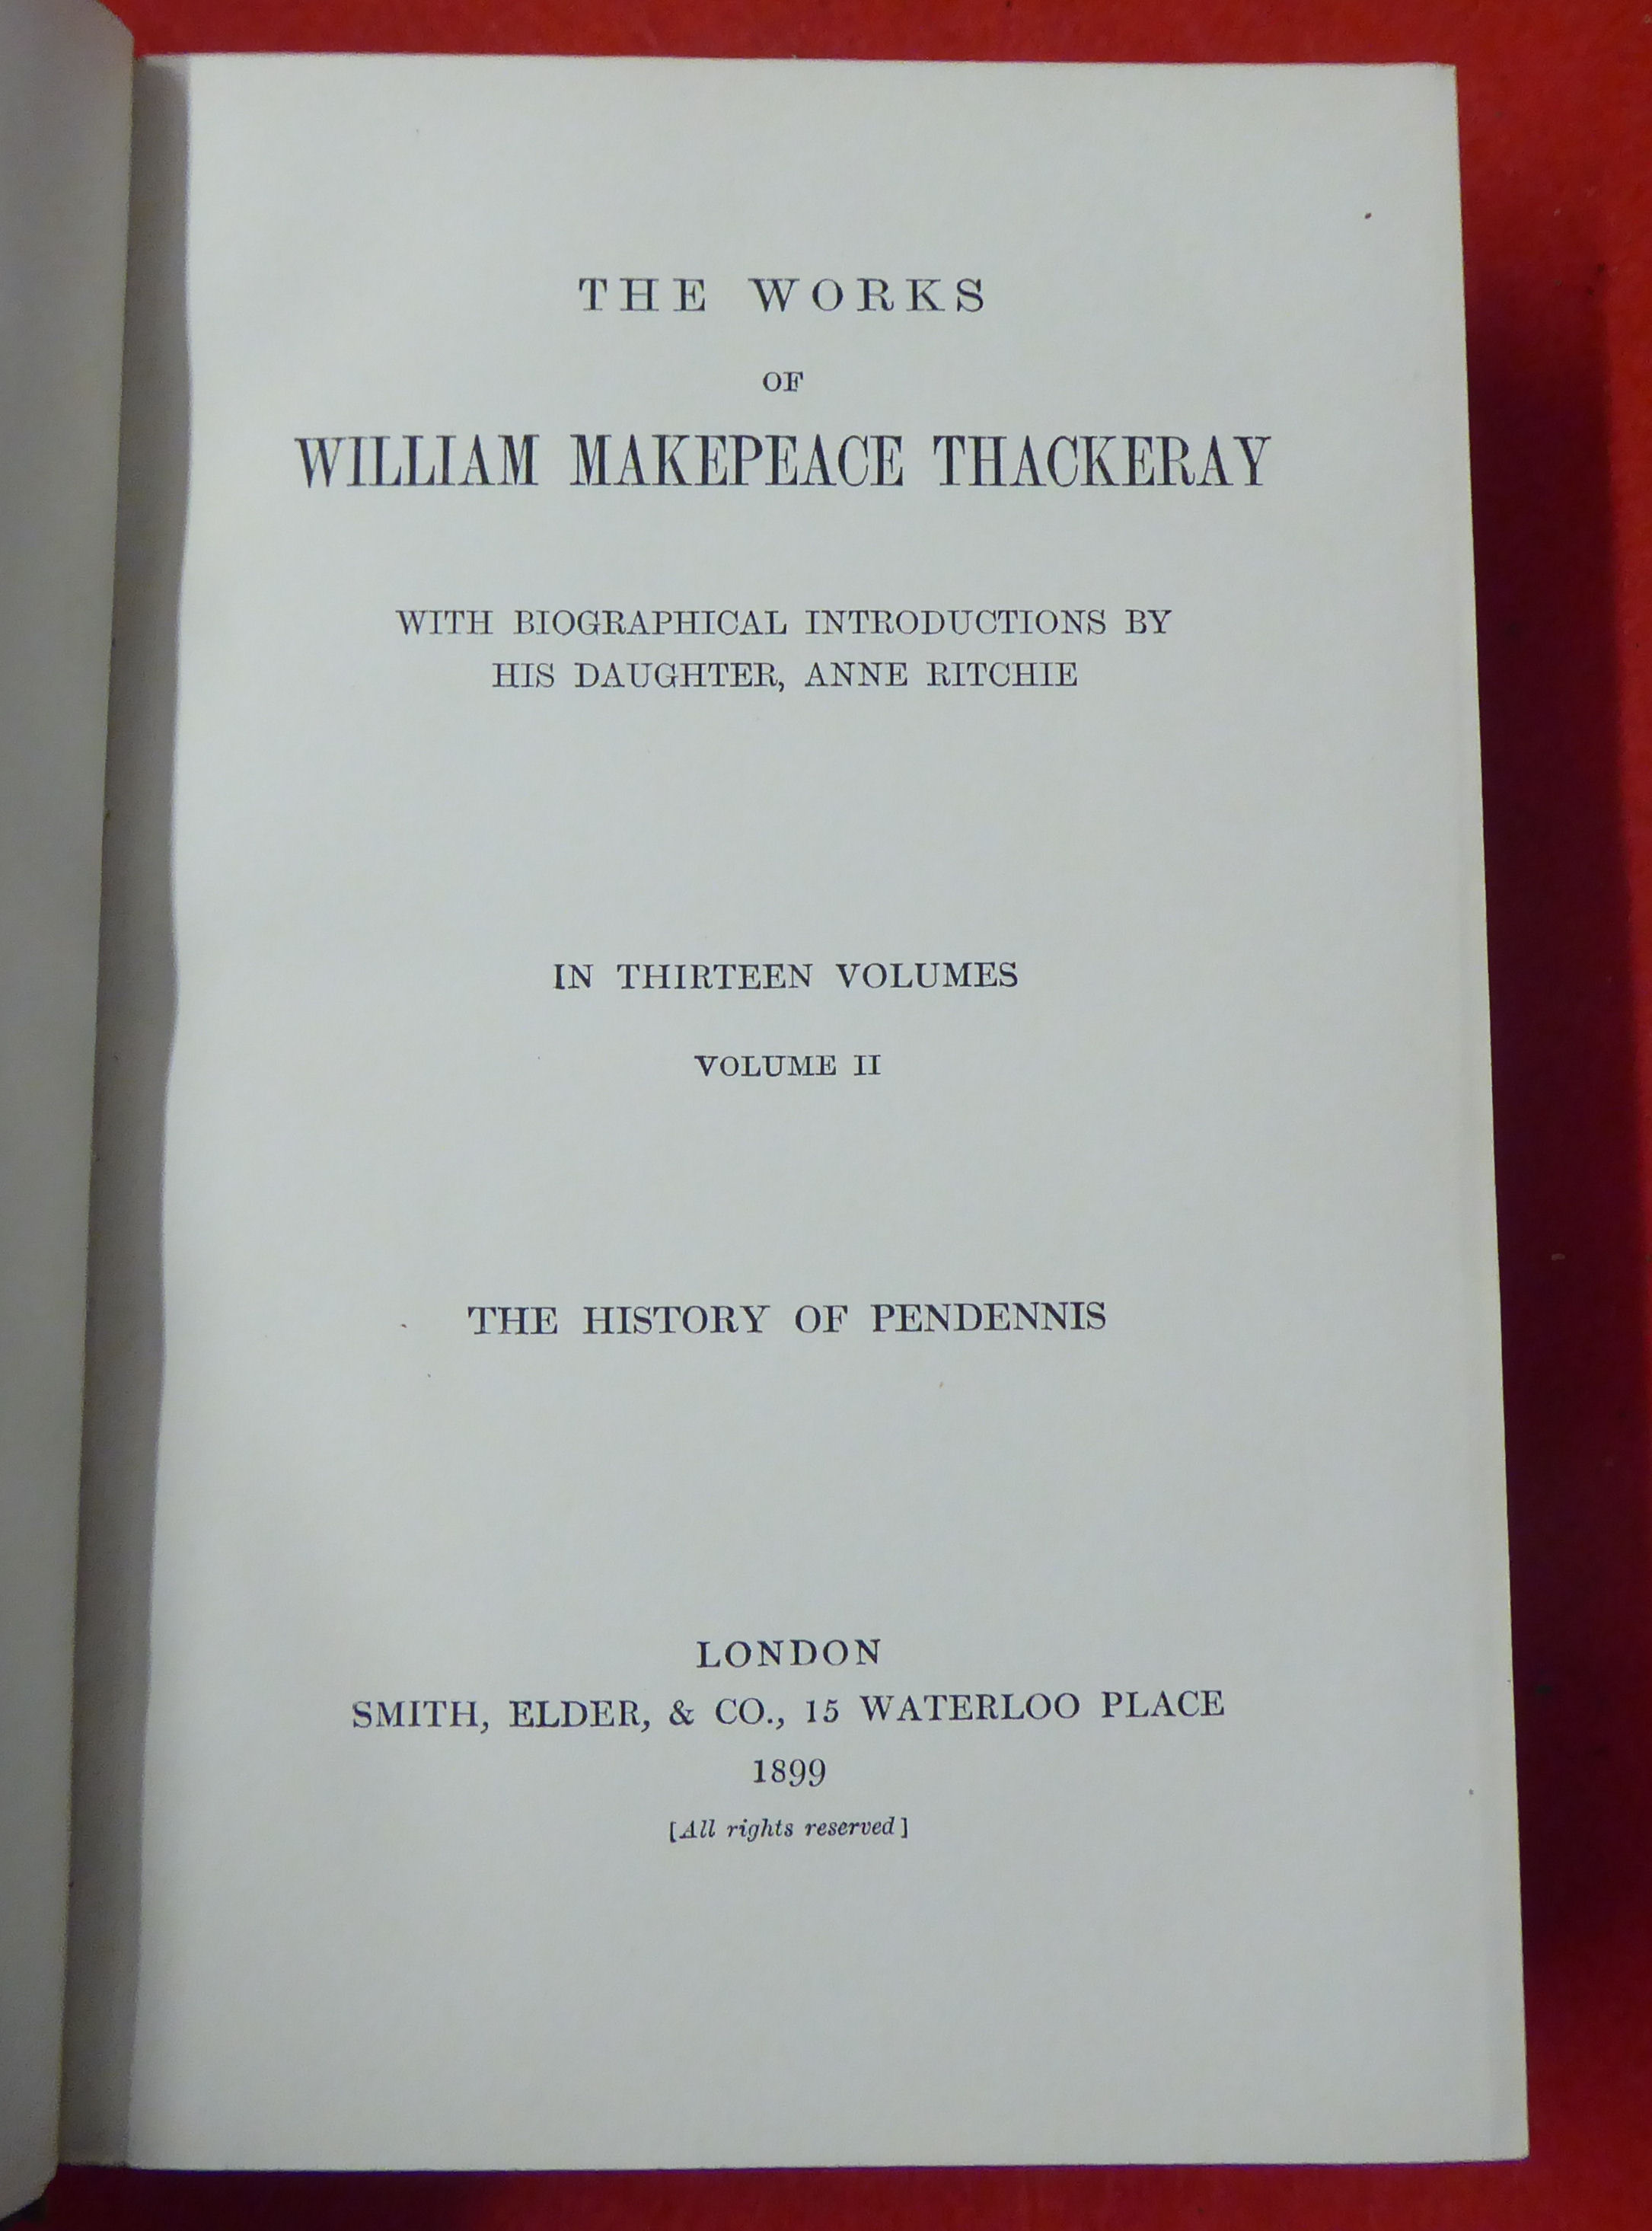 Books: 'The Works of William Makepeace Thackeray'  dated 1900, in thirteen volumes  (volume seven - Image 5 of 16